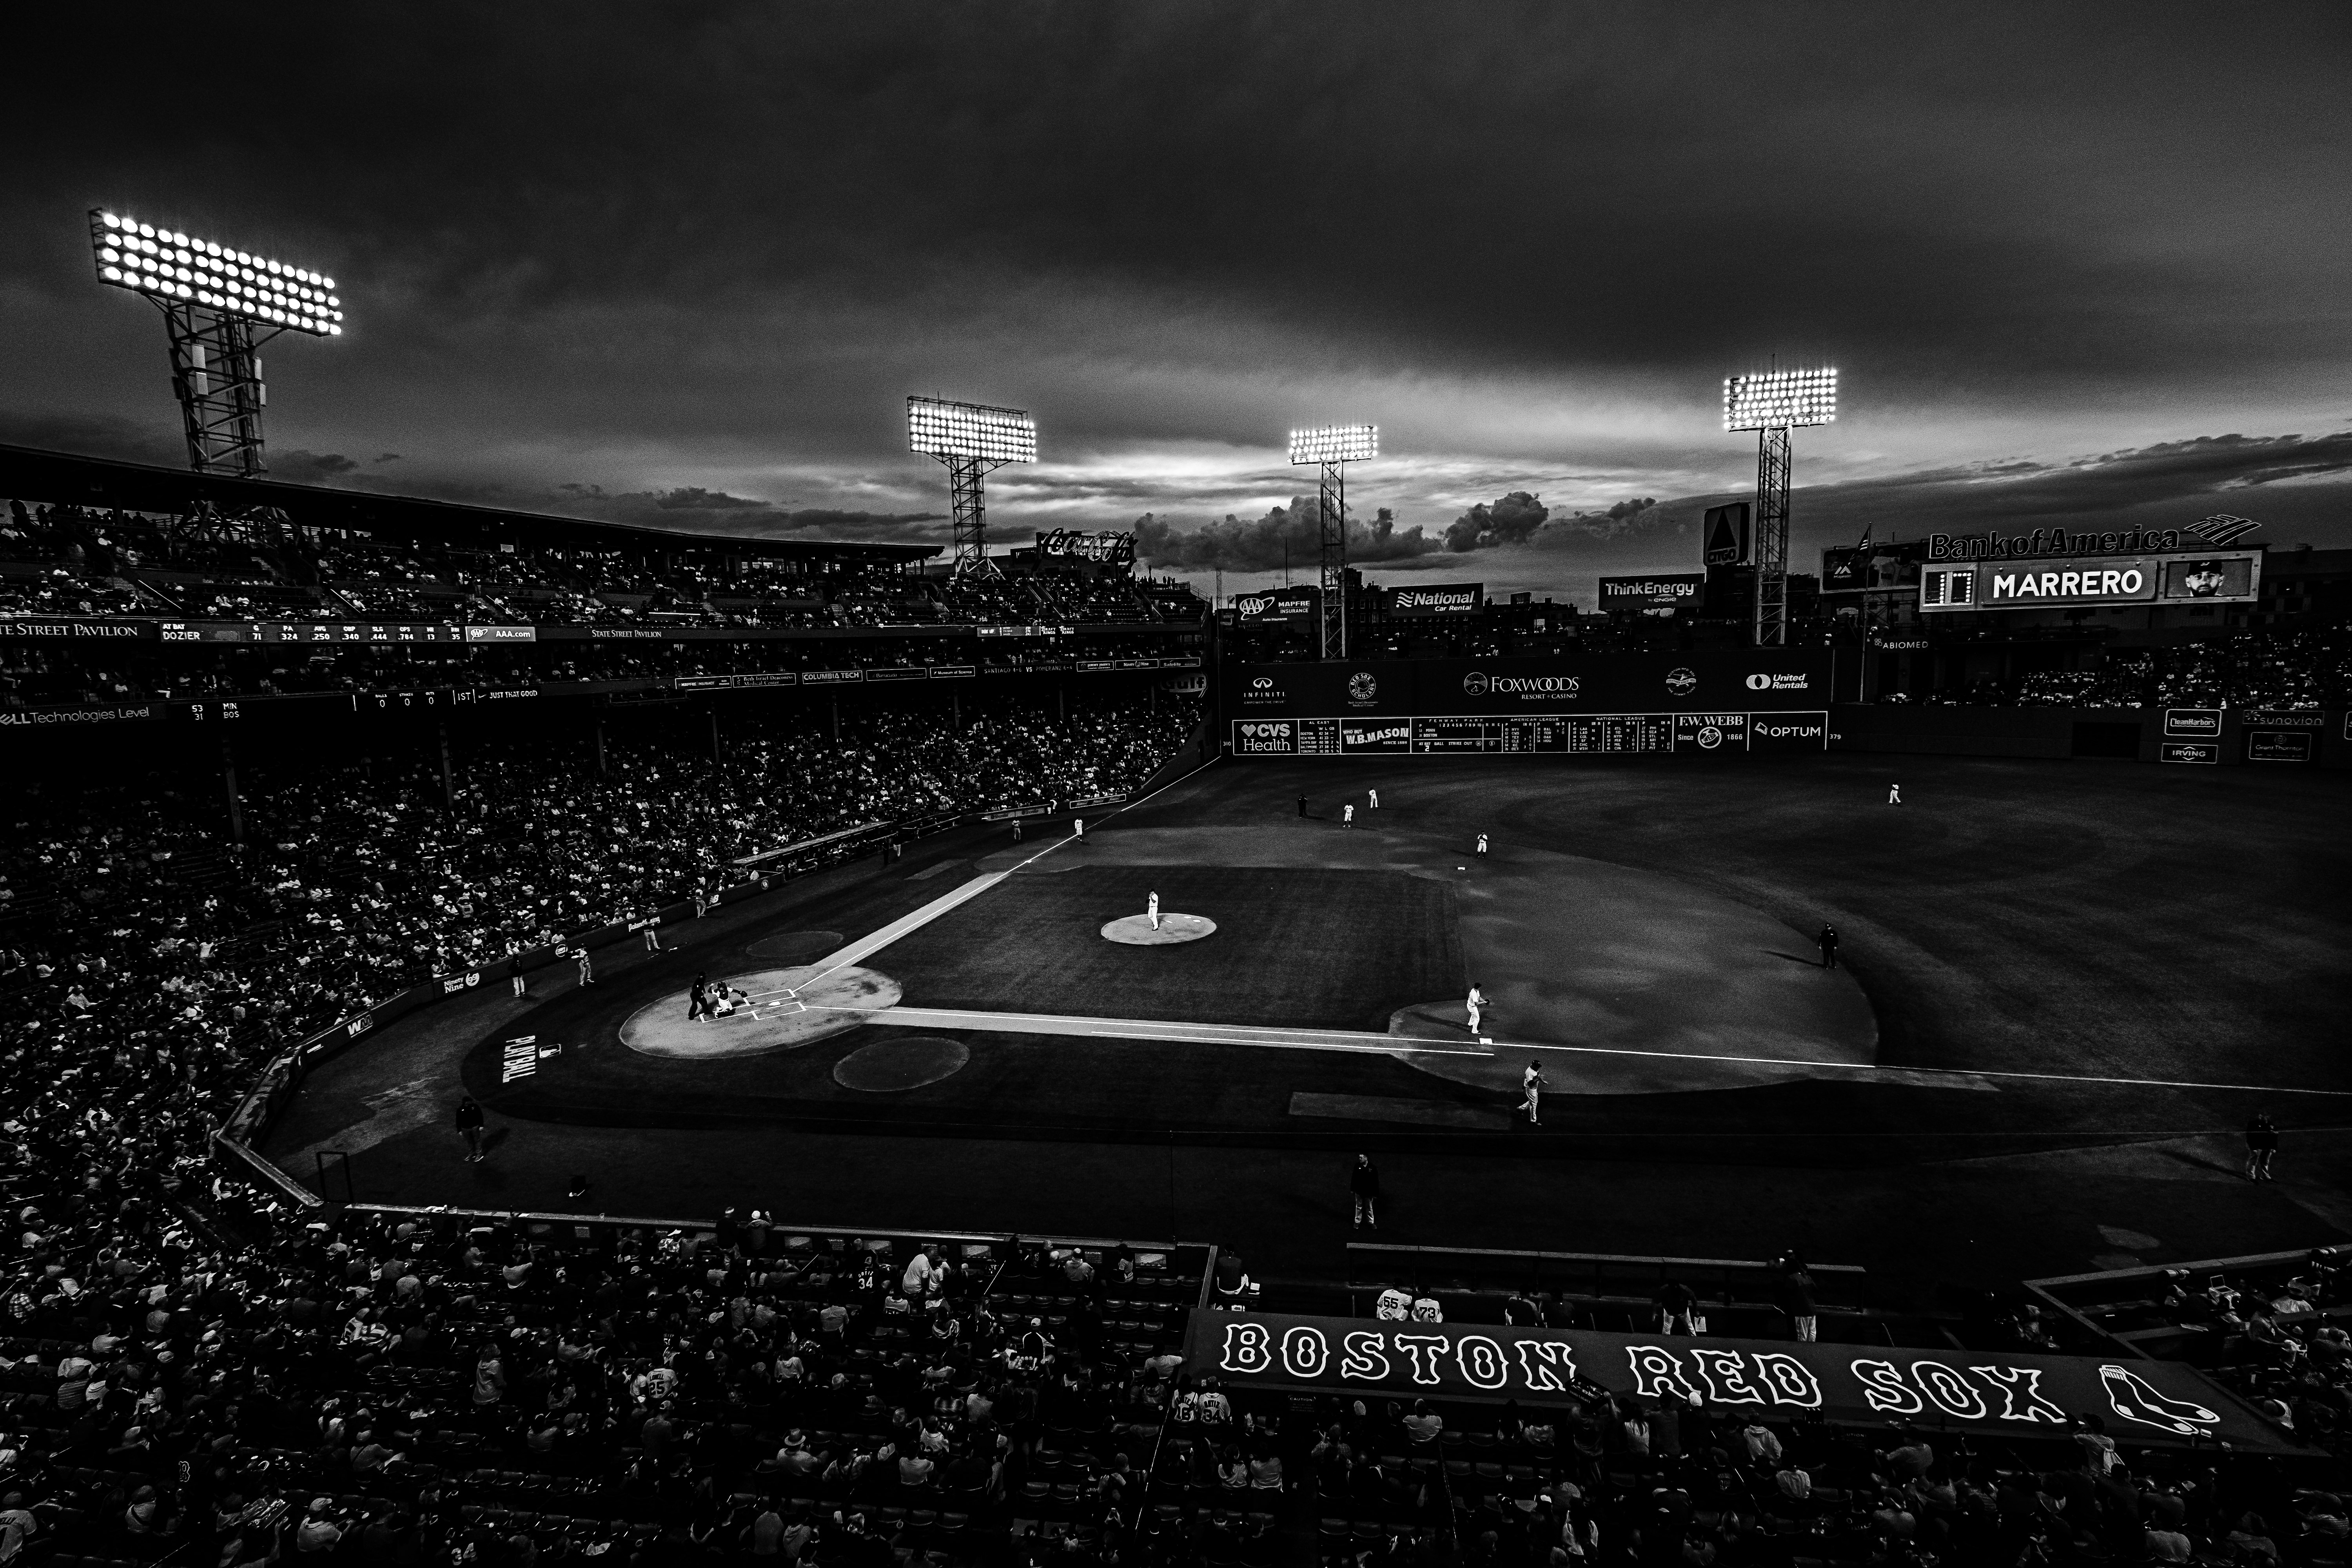 grayscale photography of baseball field with people on bleachers